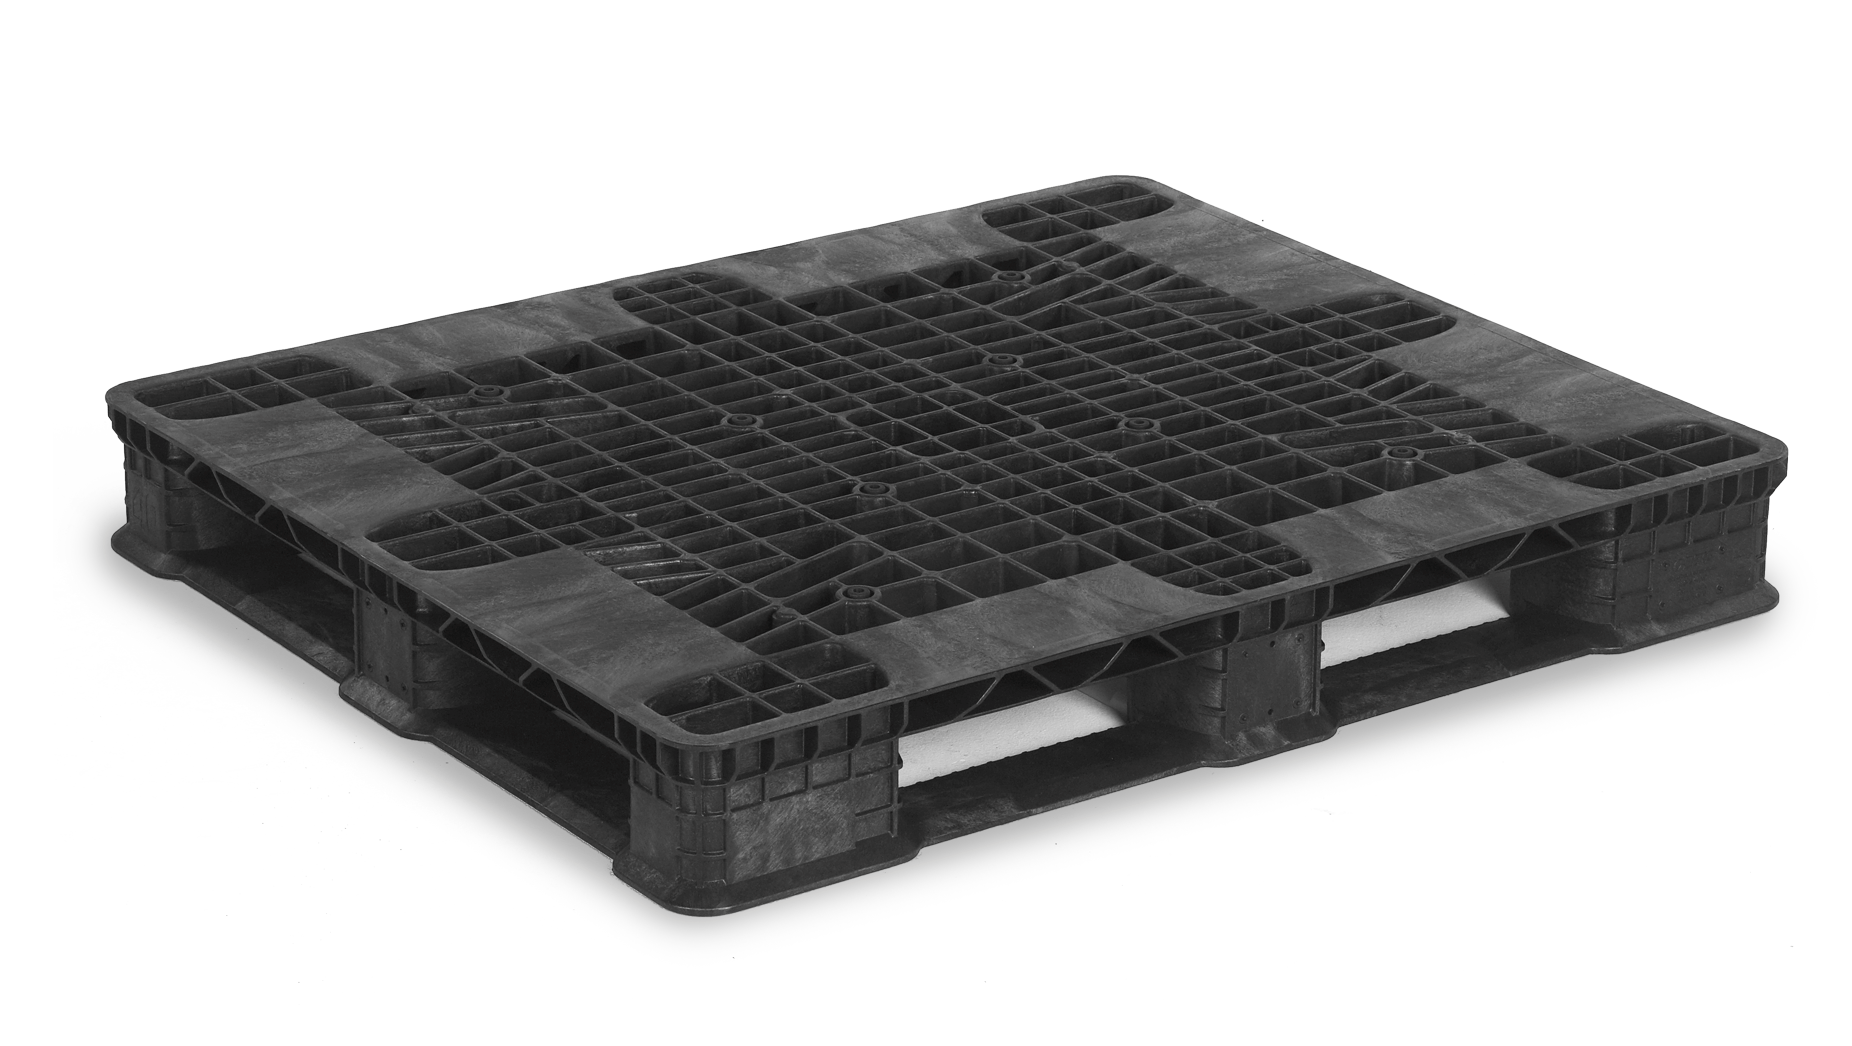 ORBIS INTRODUCES PROLIANT™, A NEW MATERIAL FOR USE IN ITS FAMILY OF FIRE-RETARDANT PLASTIC PALLETS